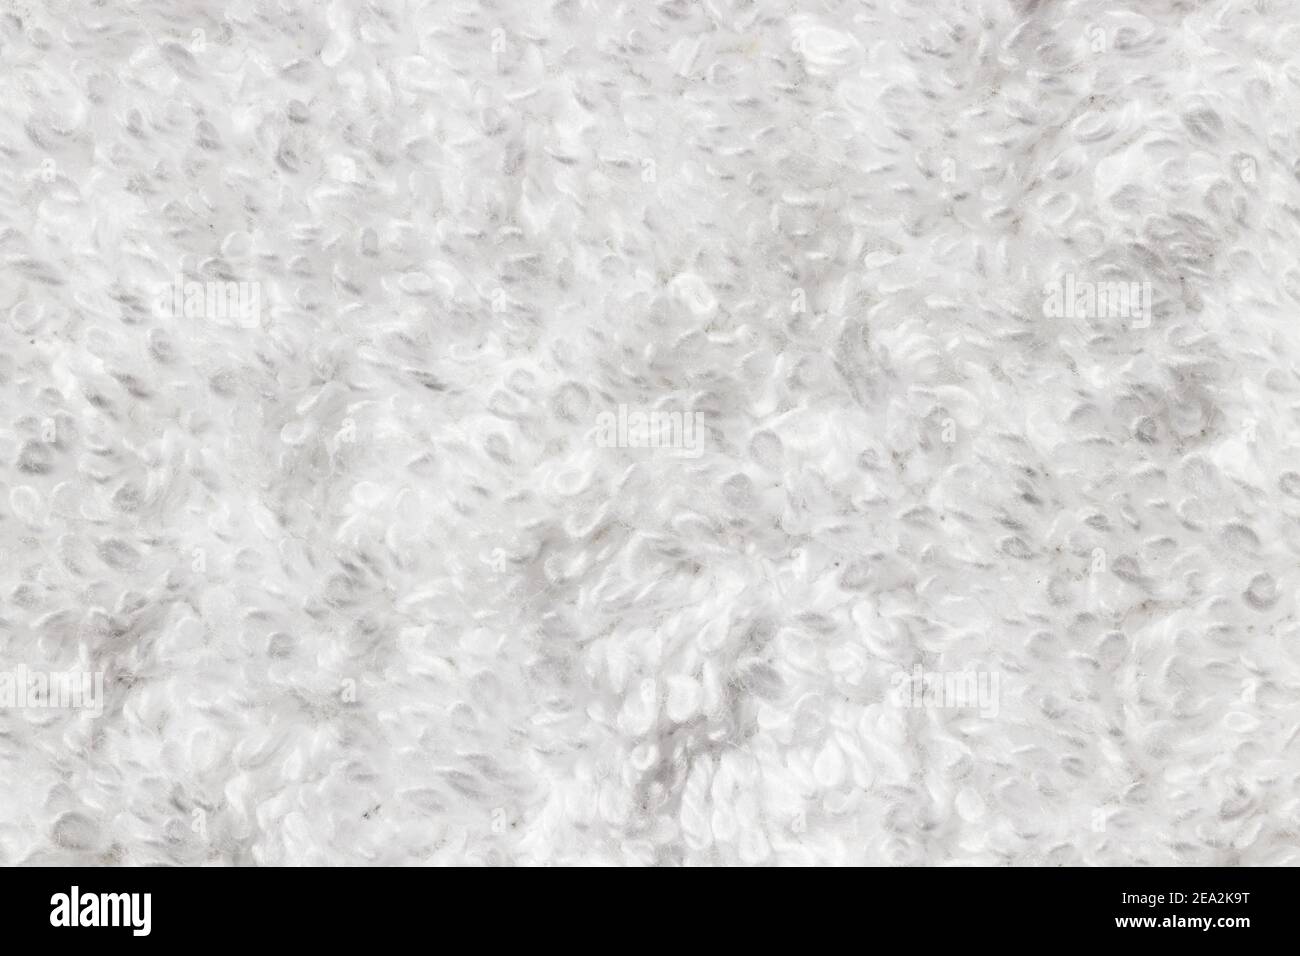 Texture with abstact pattern of white cotton fabric. Stock Photo